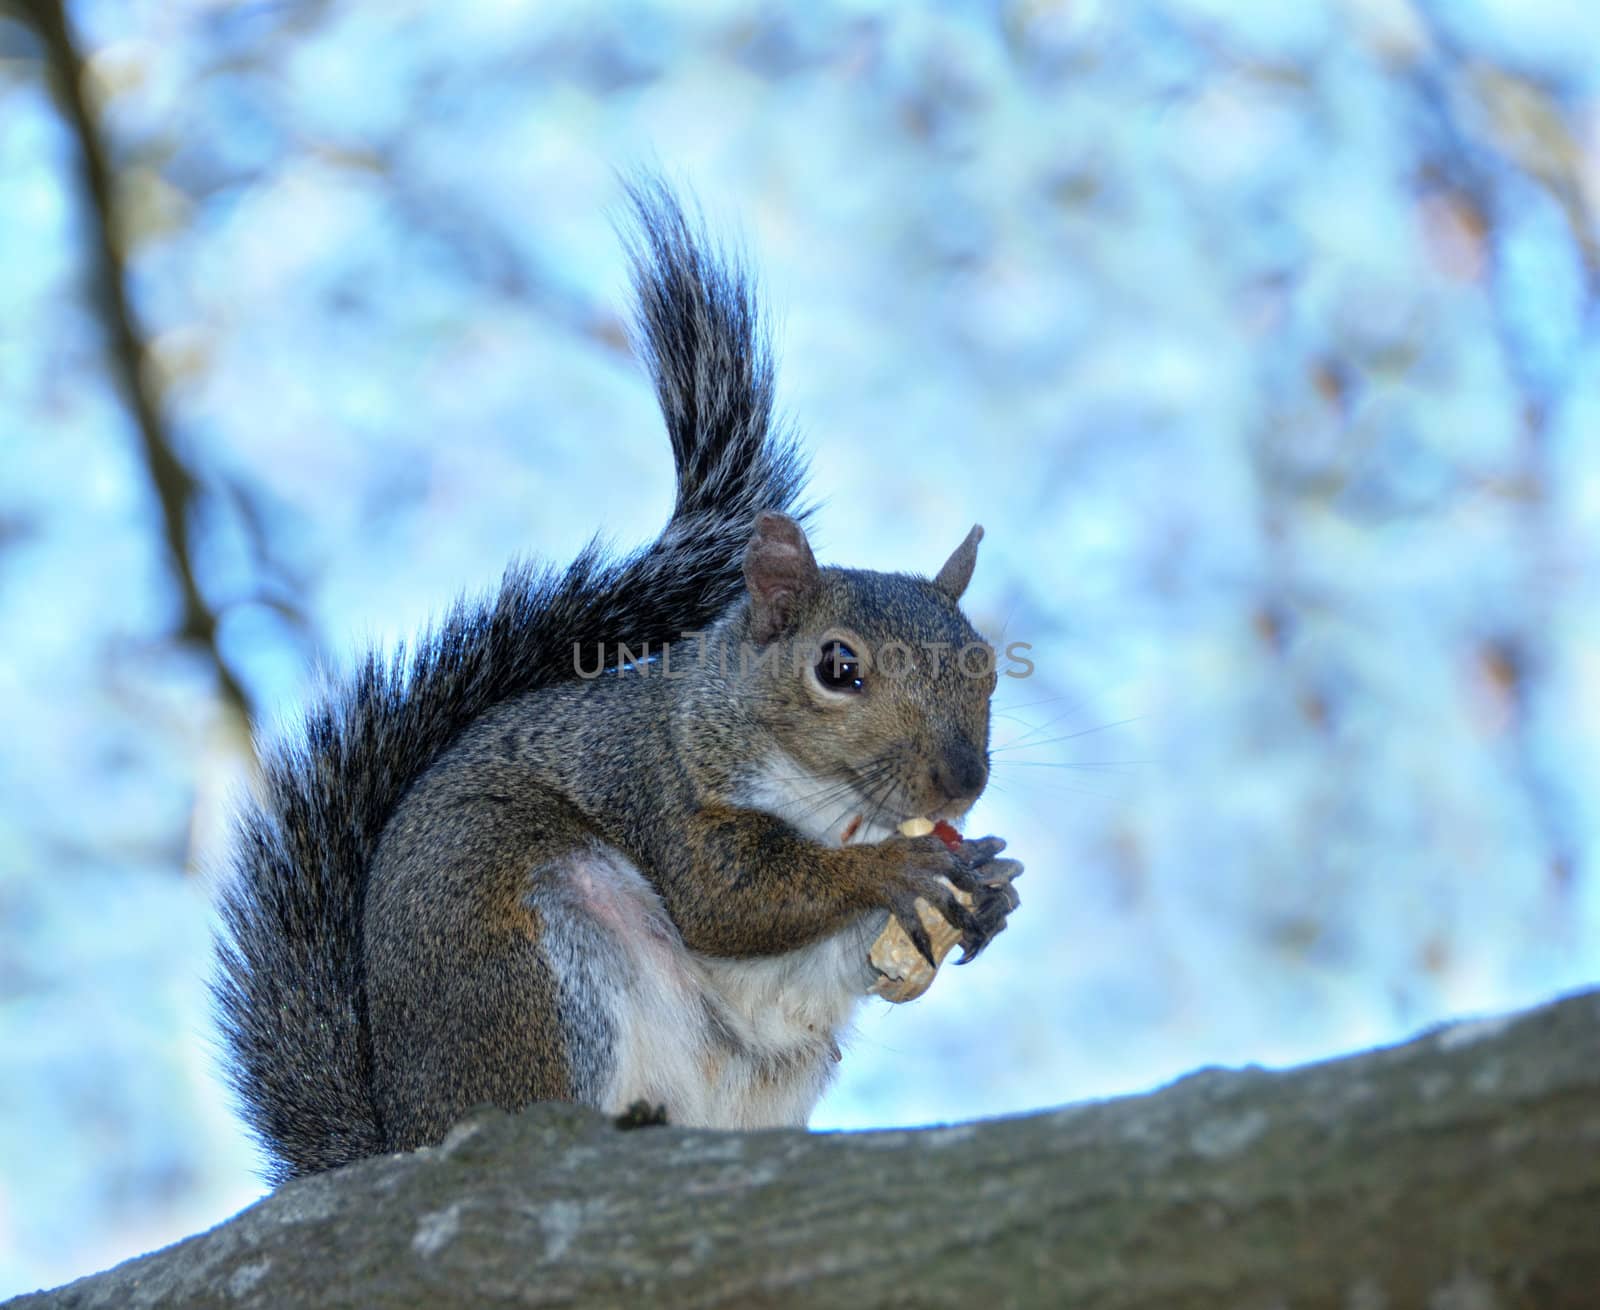 Squirrel with a Peanut Shell by goldenangel